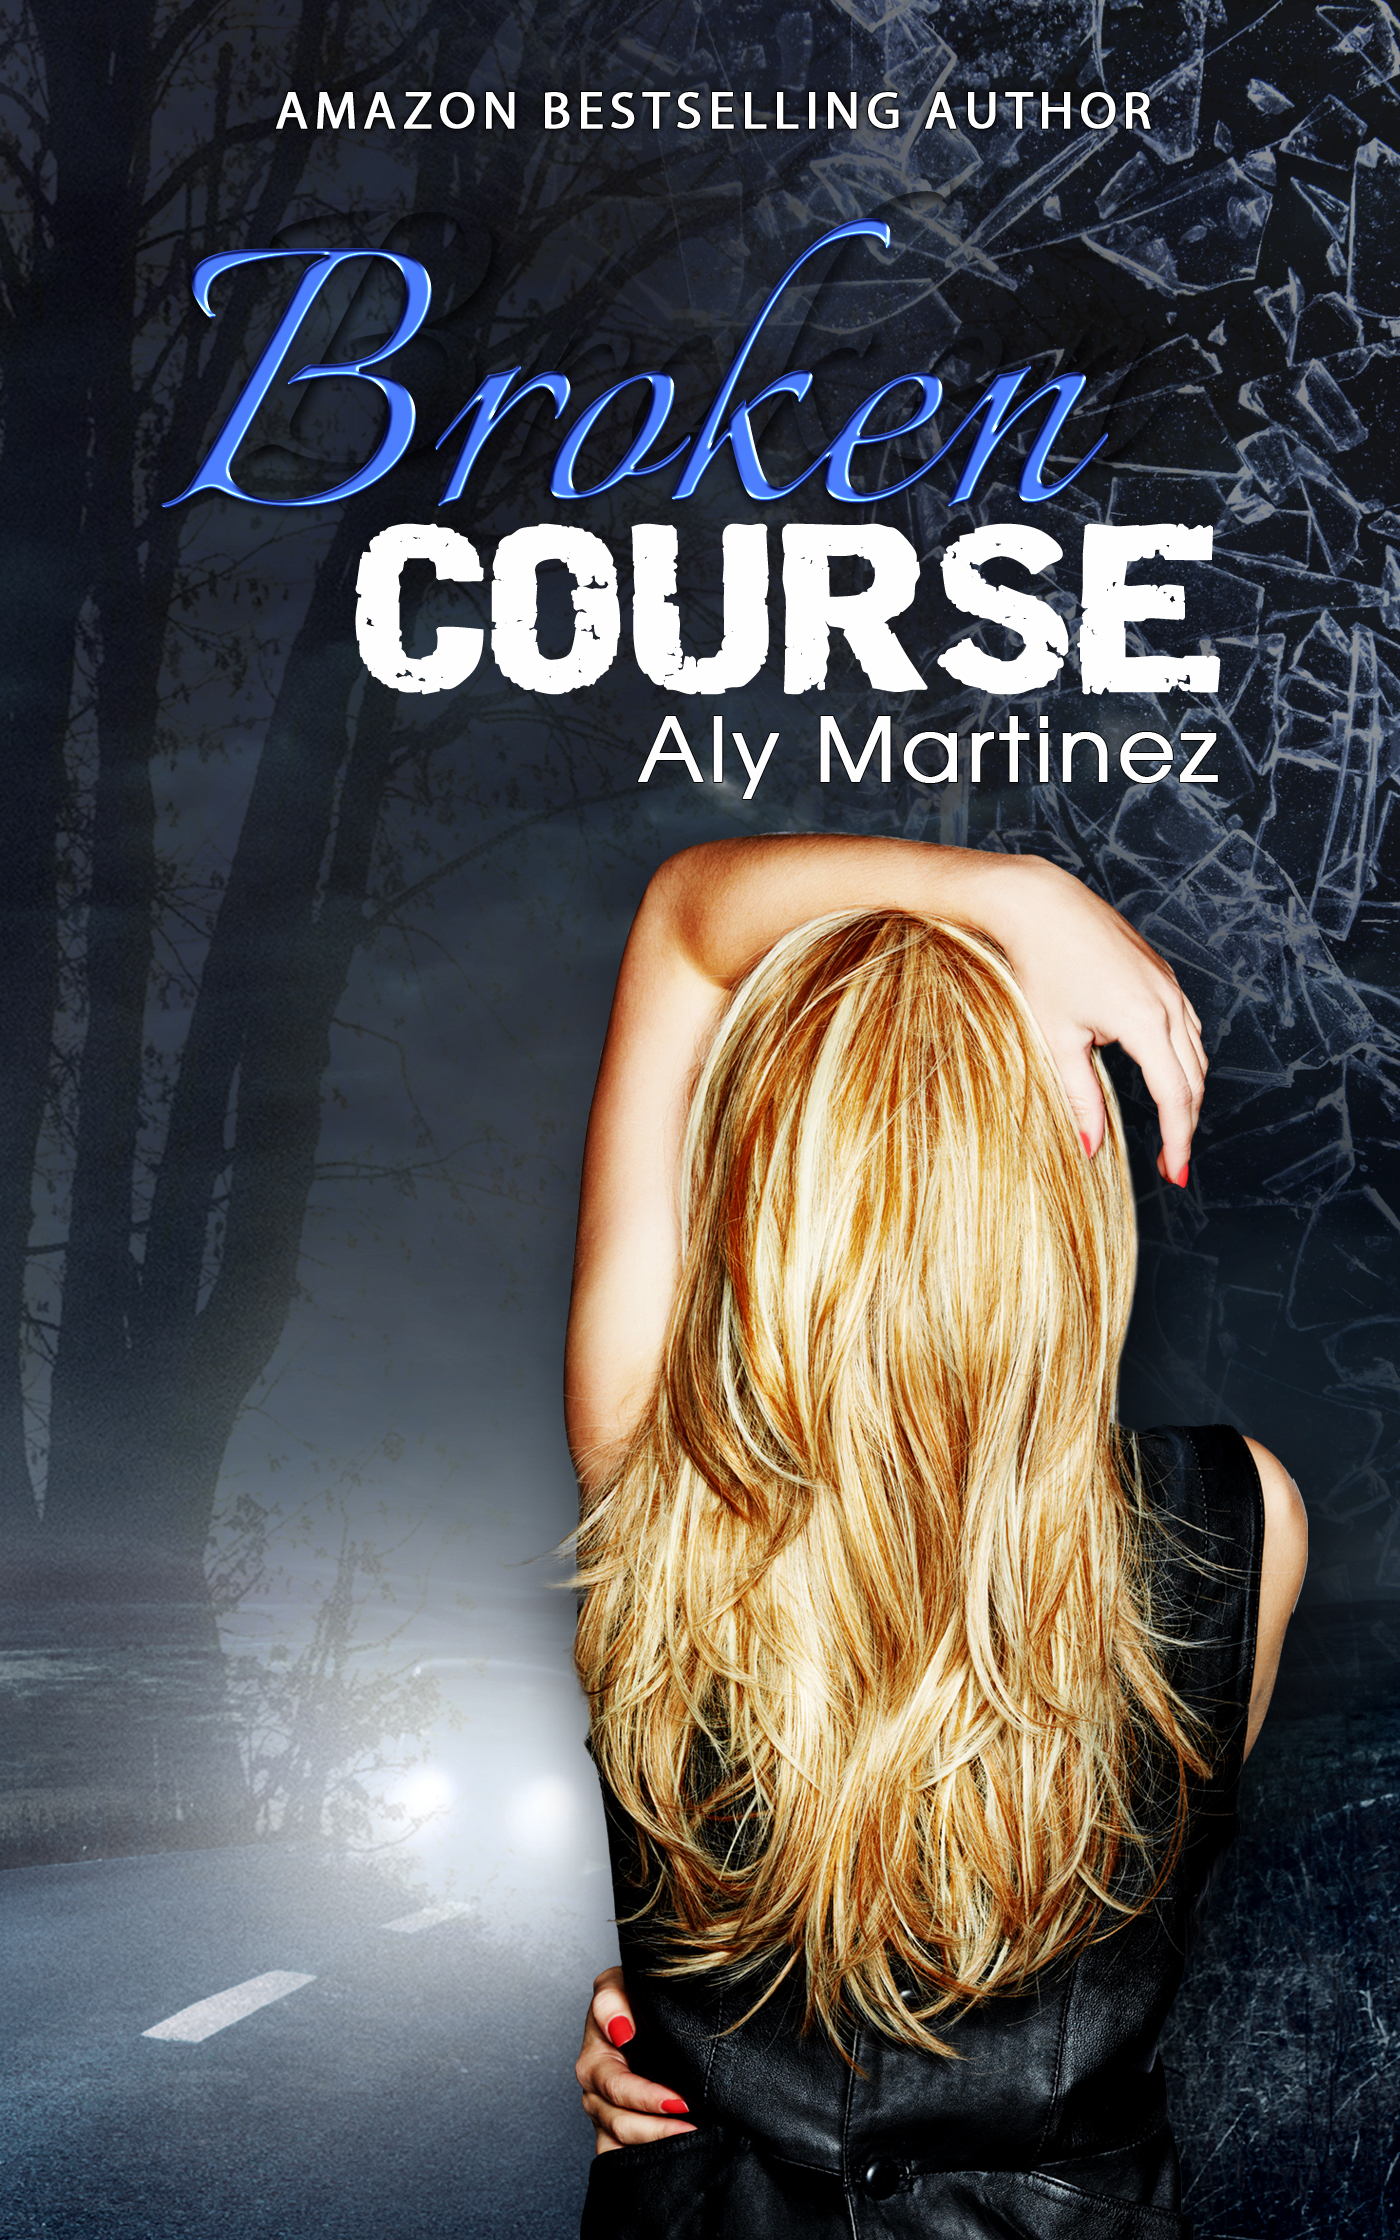 REVIEW:  4 1/2 Stars for Broken Course by Aly Martinez